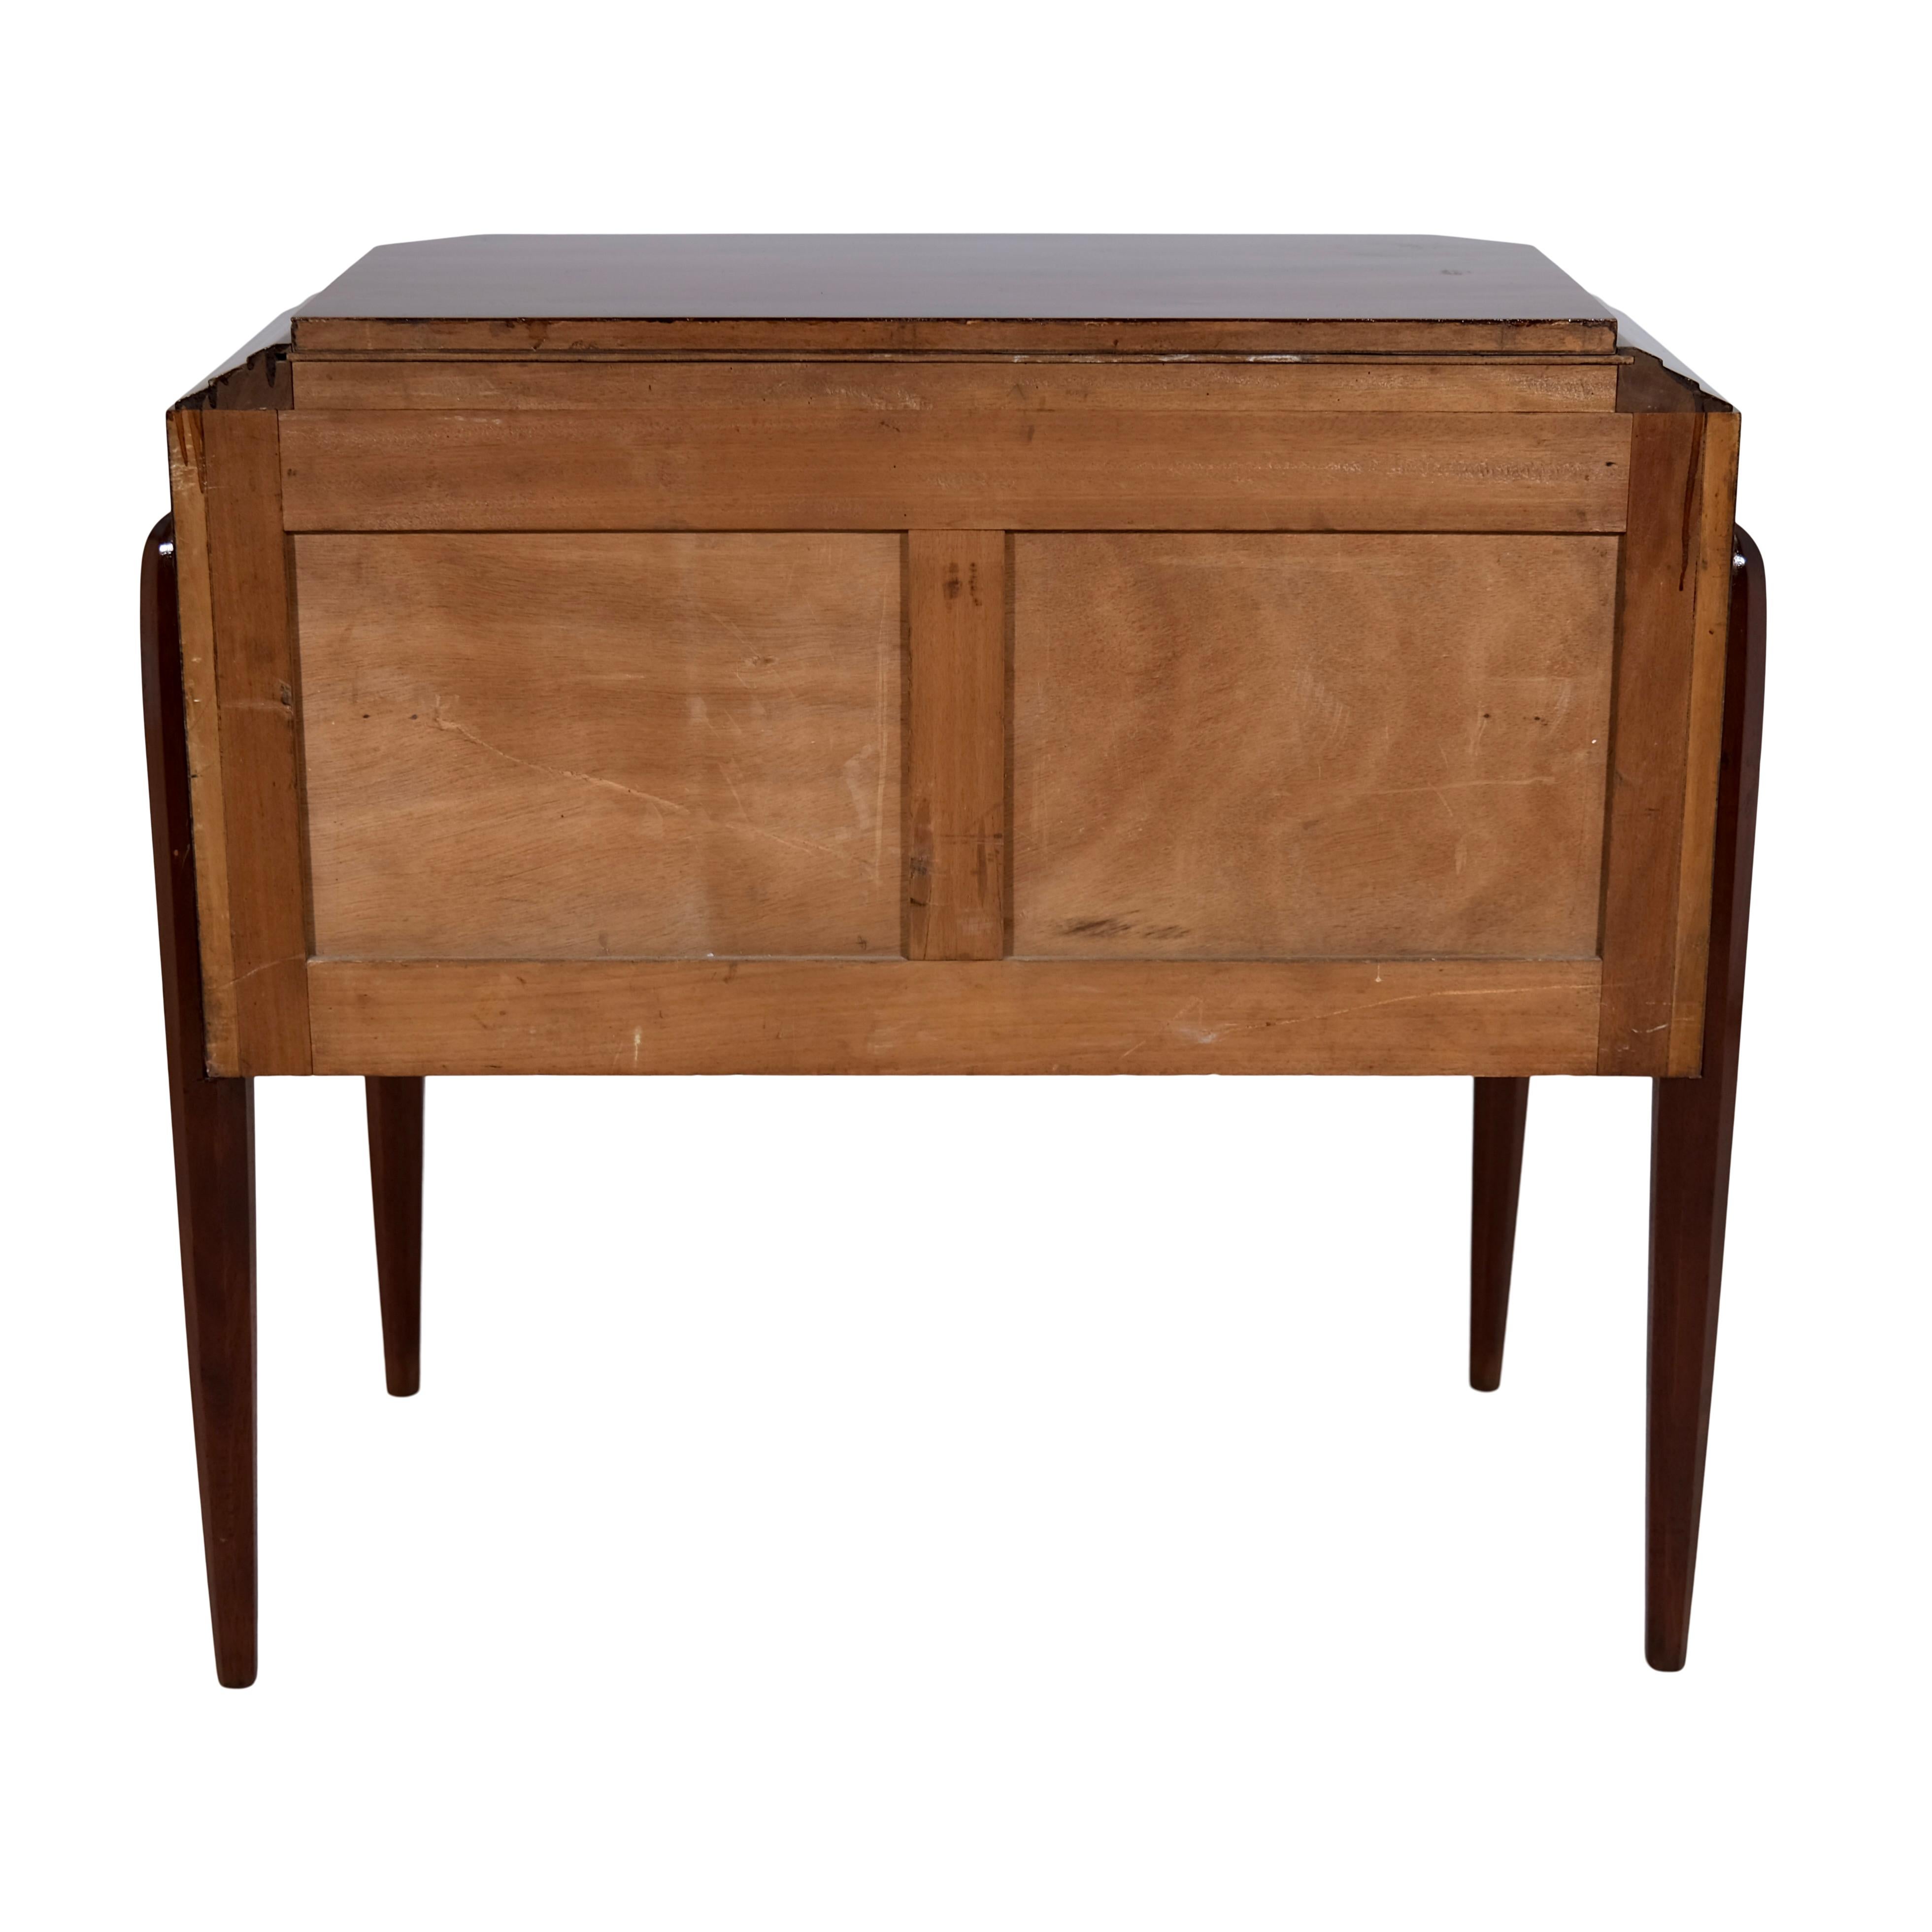 French Art Deco Chest Of Drawers in Mahogany and Thuja with Floral Inlays For Sale 9